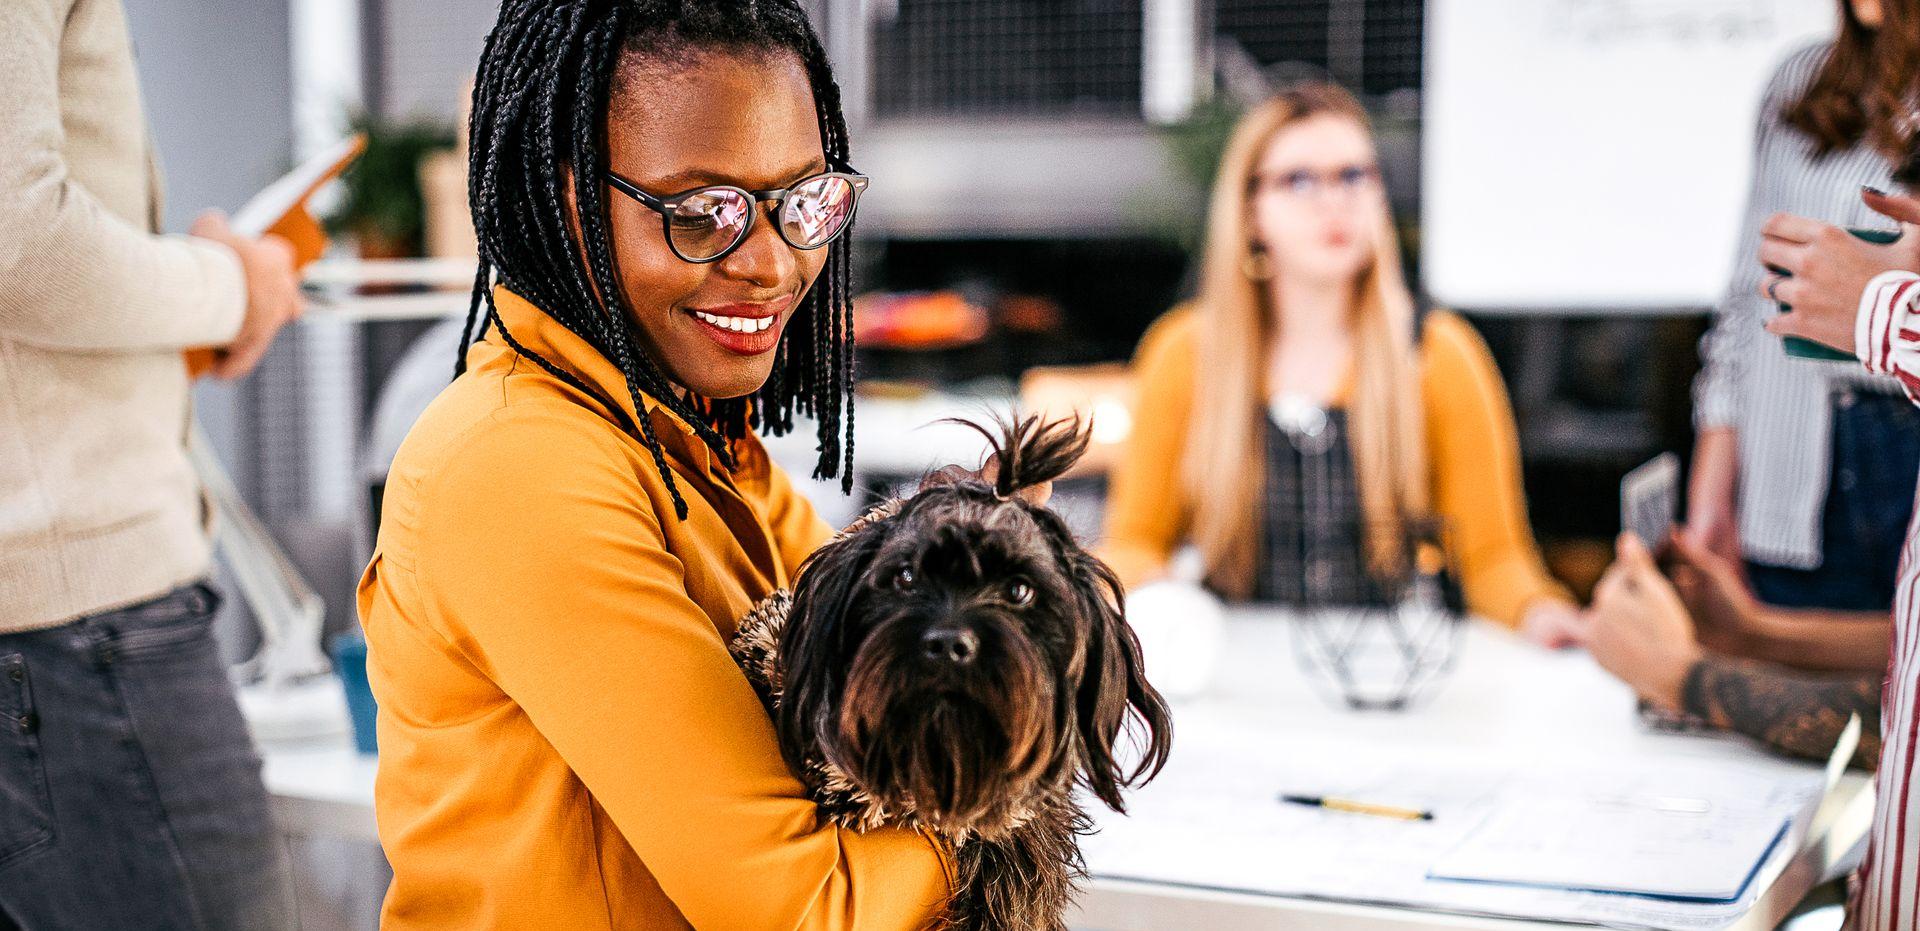 Live Light | Woman smiling during a meeting at work with coworkers and dog